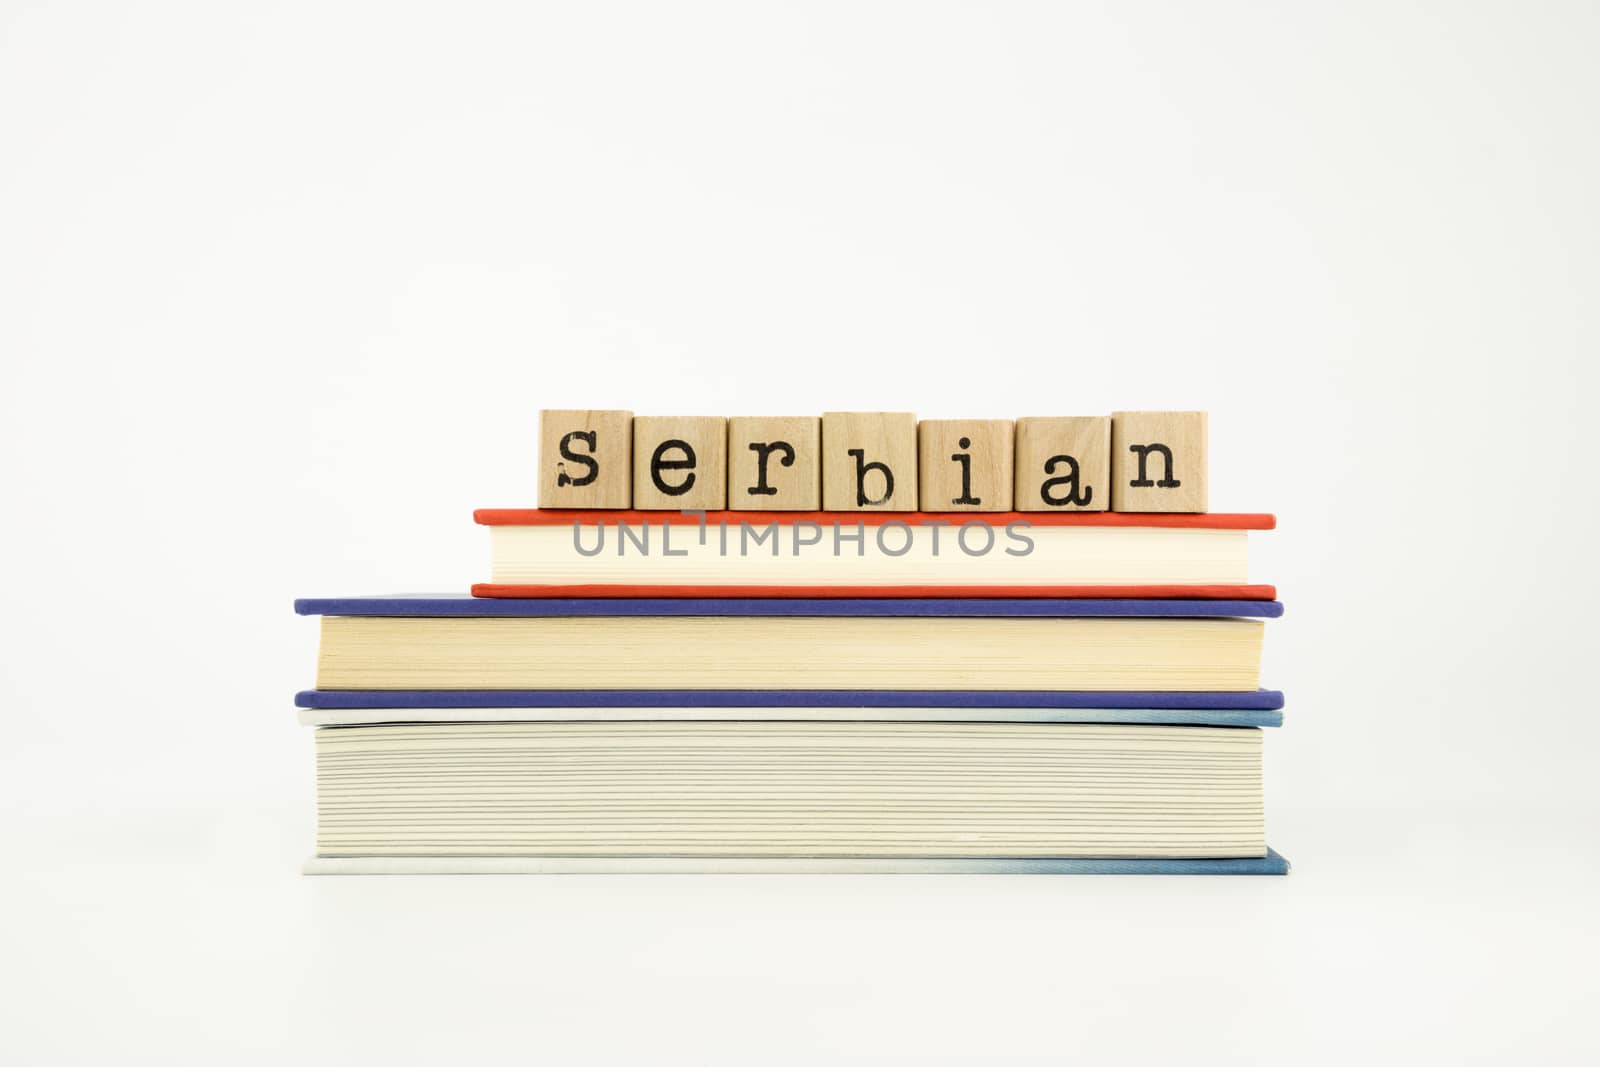 serbian word on wood stamps stack on books, foreign language and translation concept